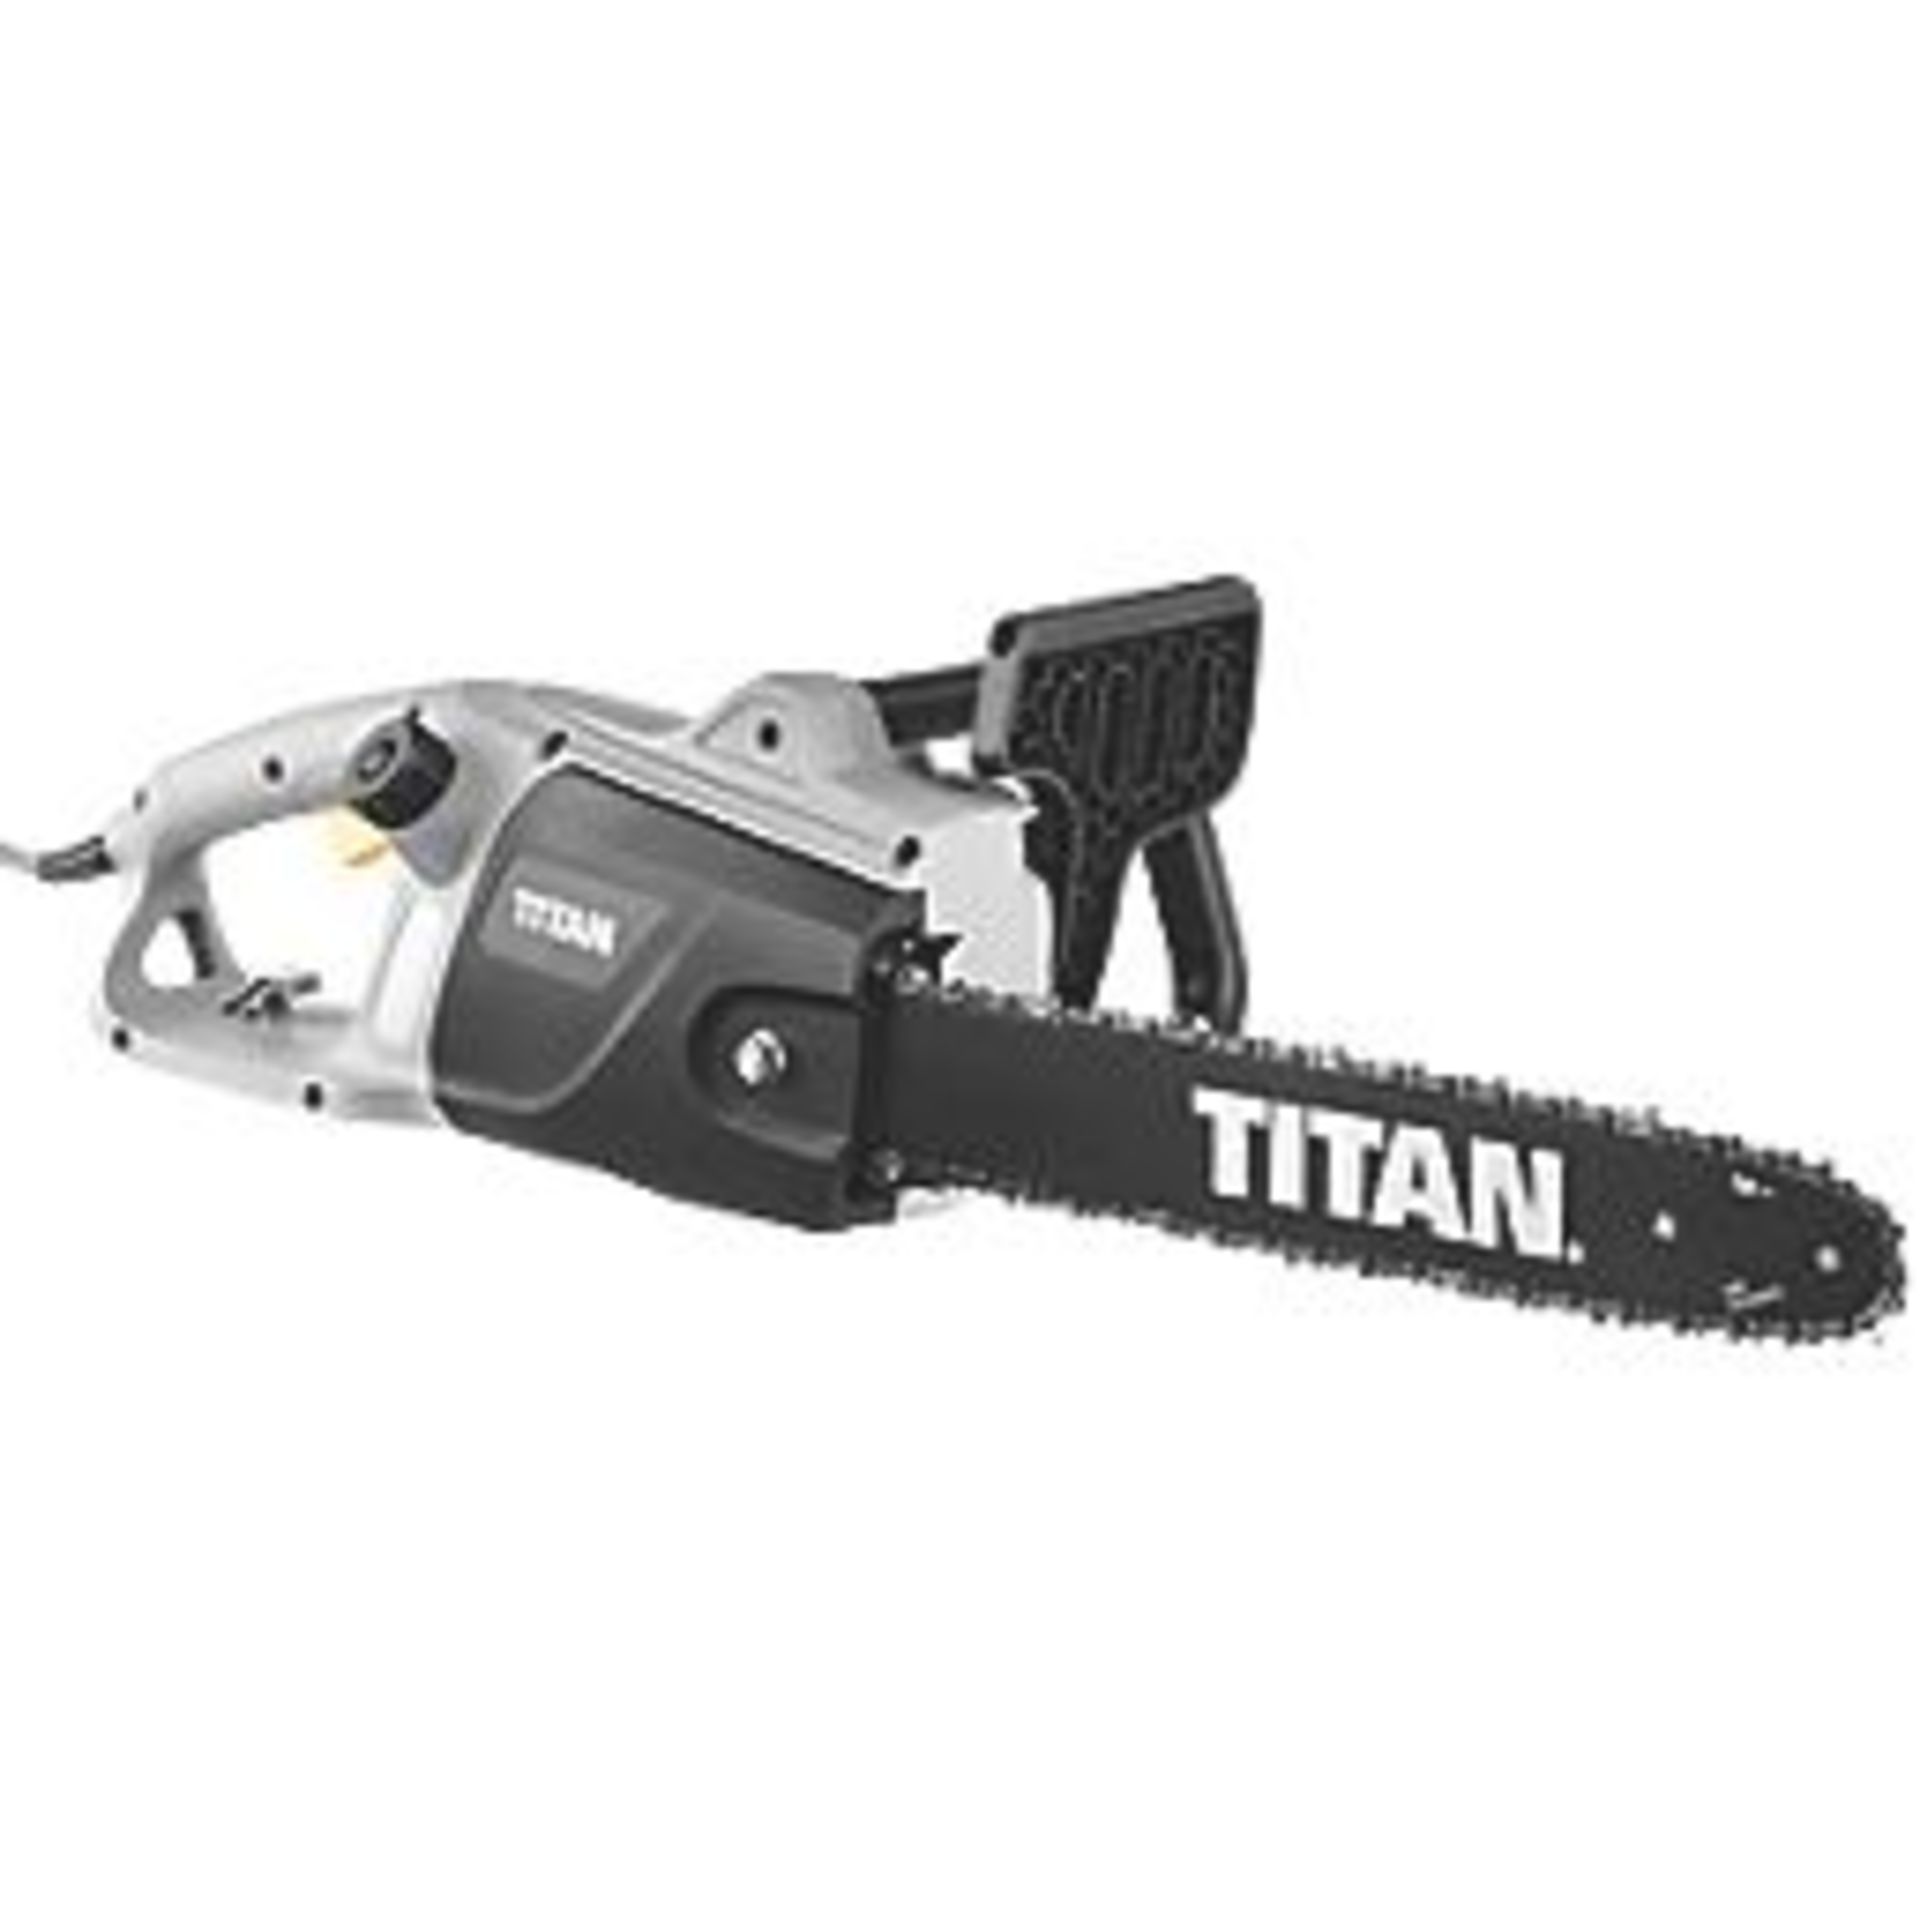 Trade lot 9 x TITAN TTL758CHN 2000W 230V ELECTRIC 40CM CHAINSAW. - P5. Electric chainsaw with